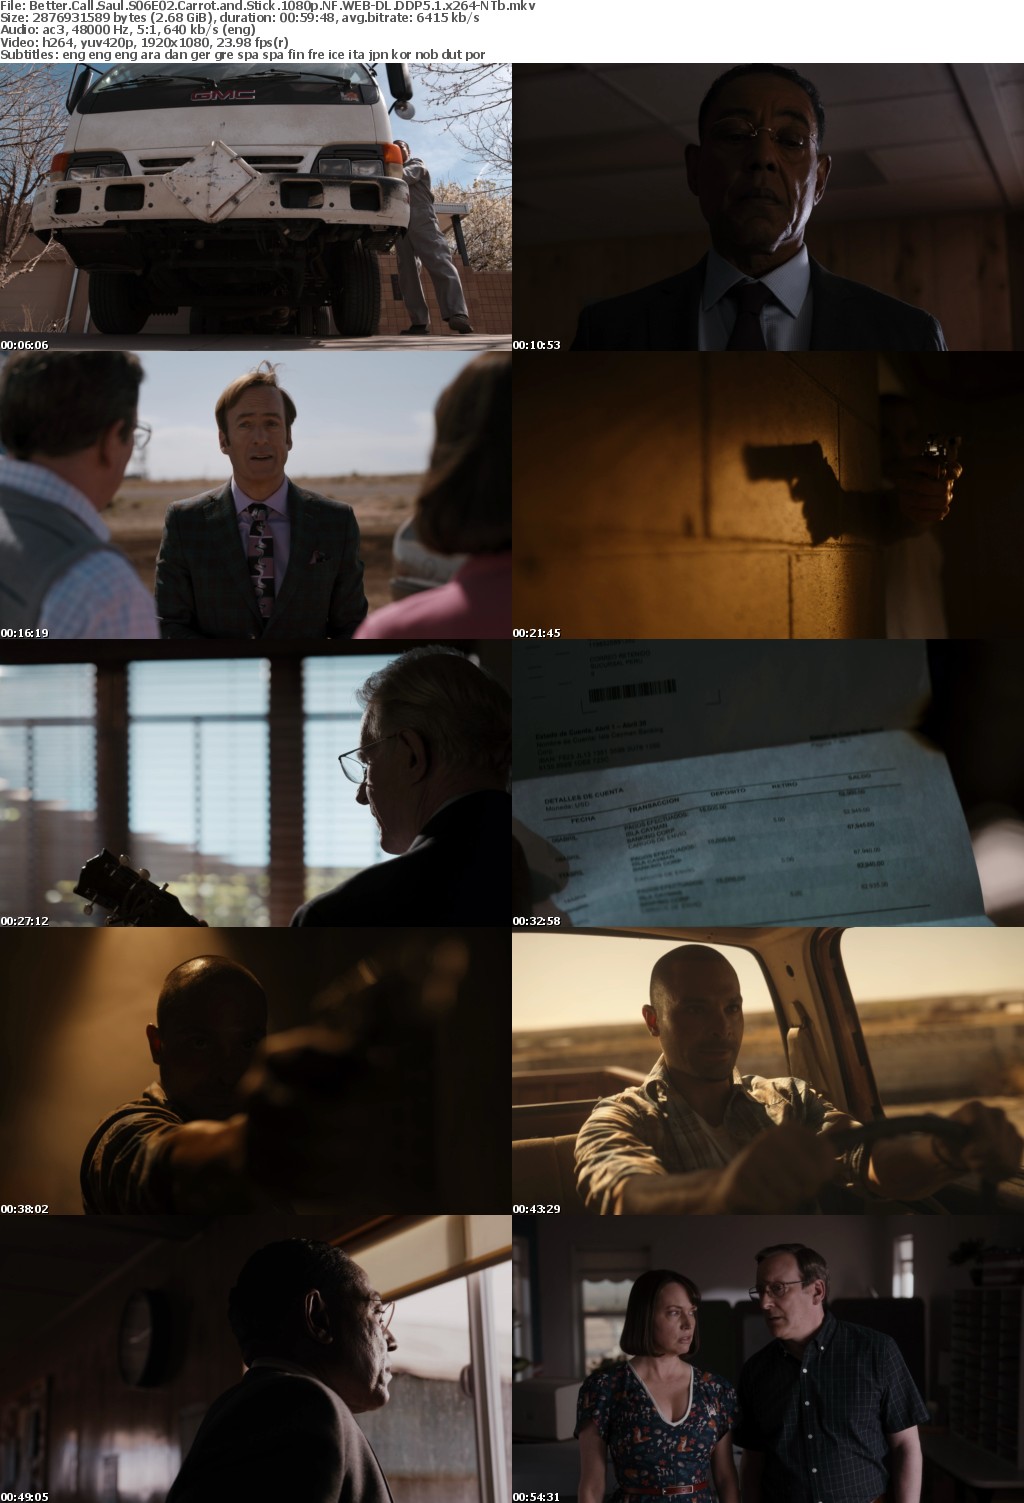 Better Call Saul S06E02 Carrot and Stick 1080p NF WEBRip DDP5 1 x264-NTb